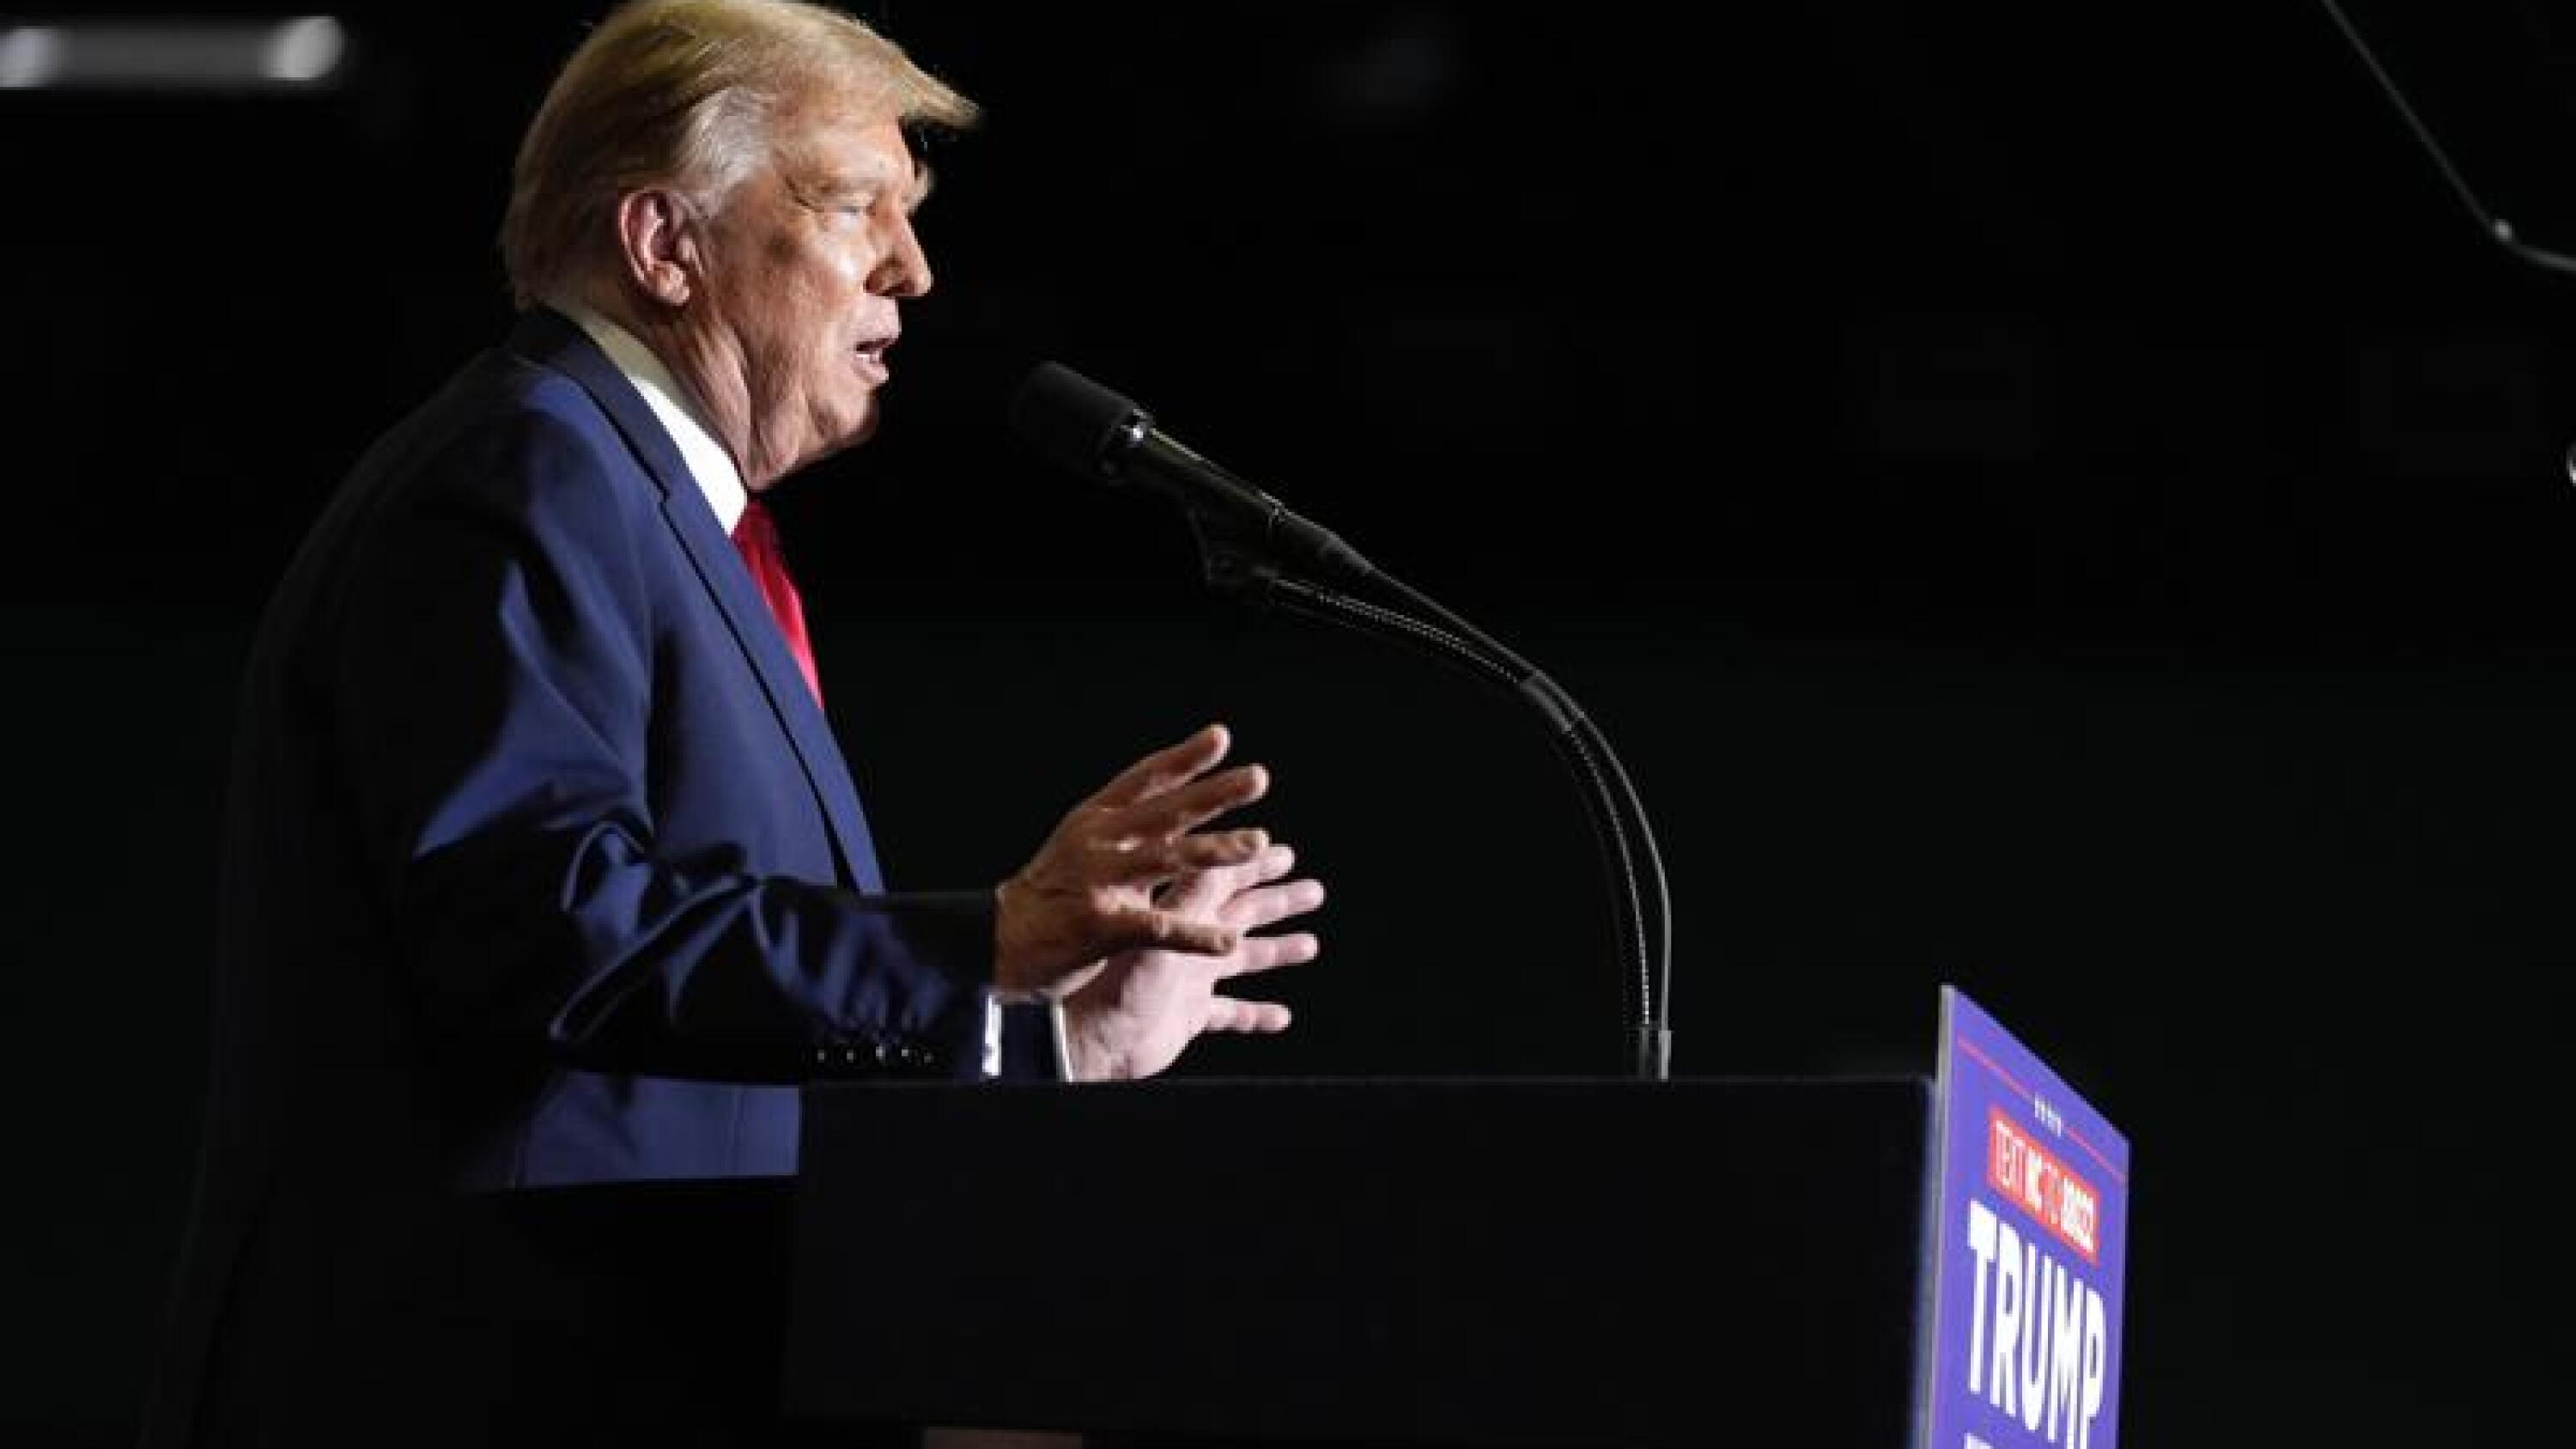 Trump escalates immigration rhetoric with ‘conspiracy’ claim about Biden trying to overthrow U.S.